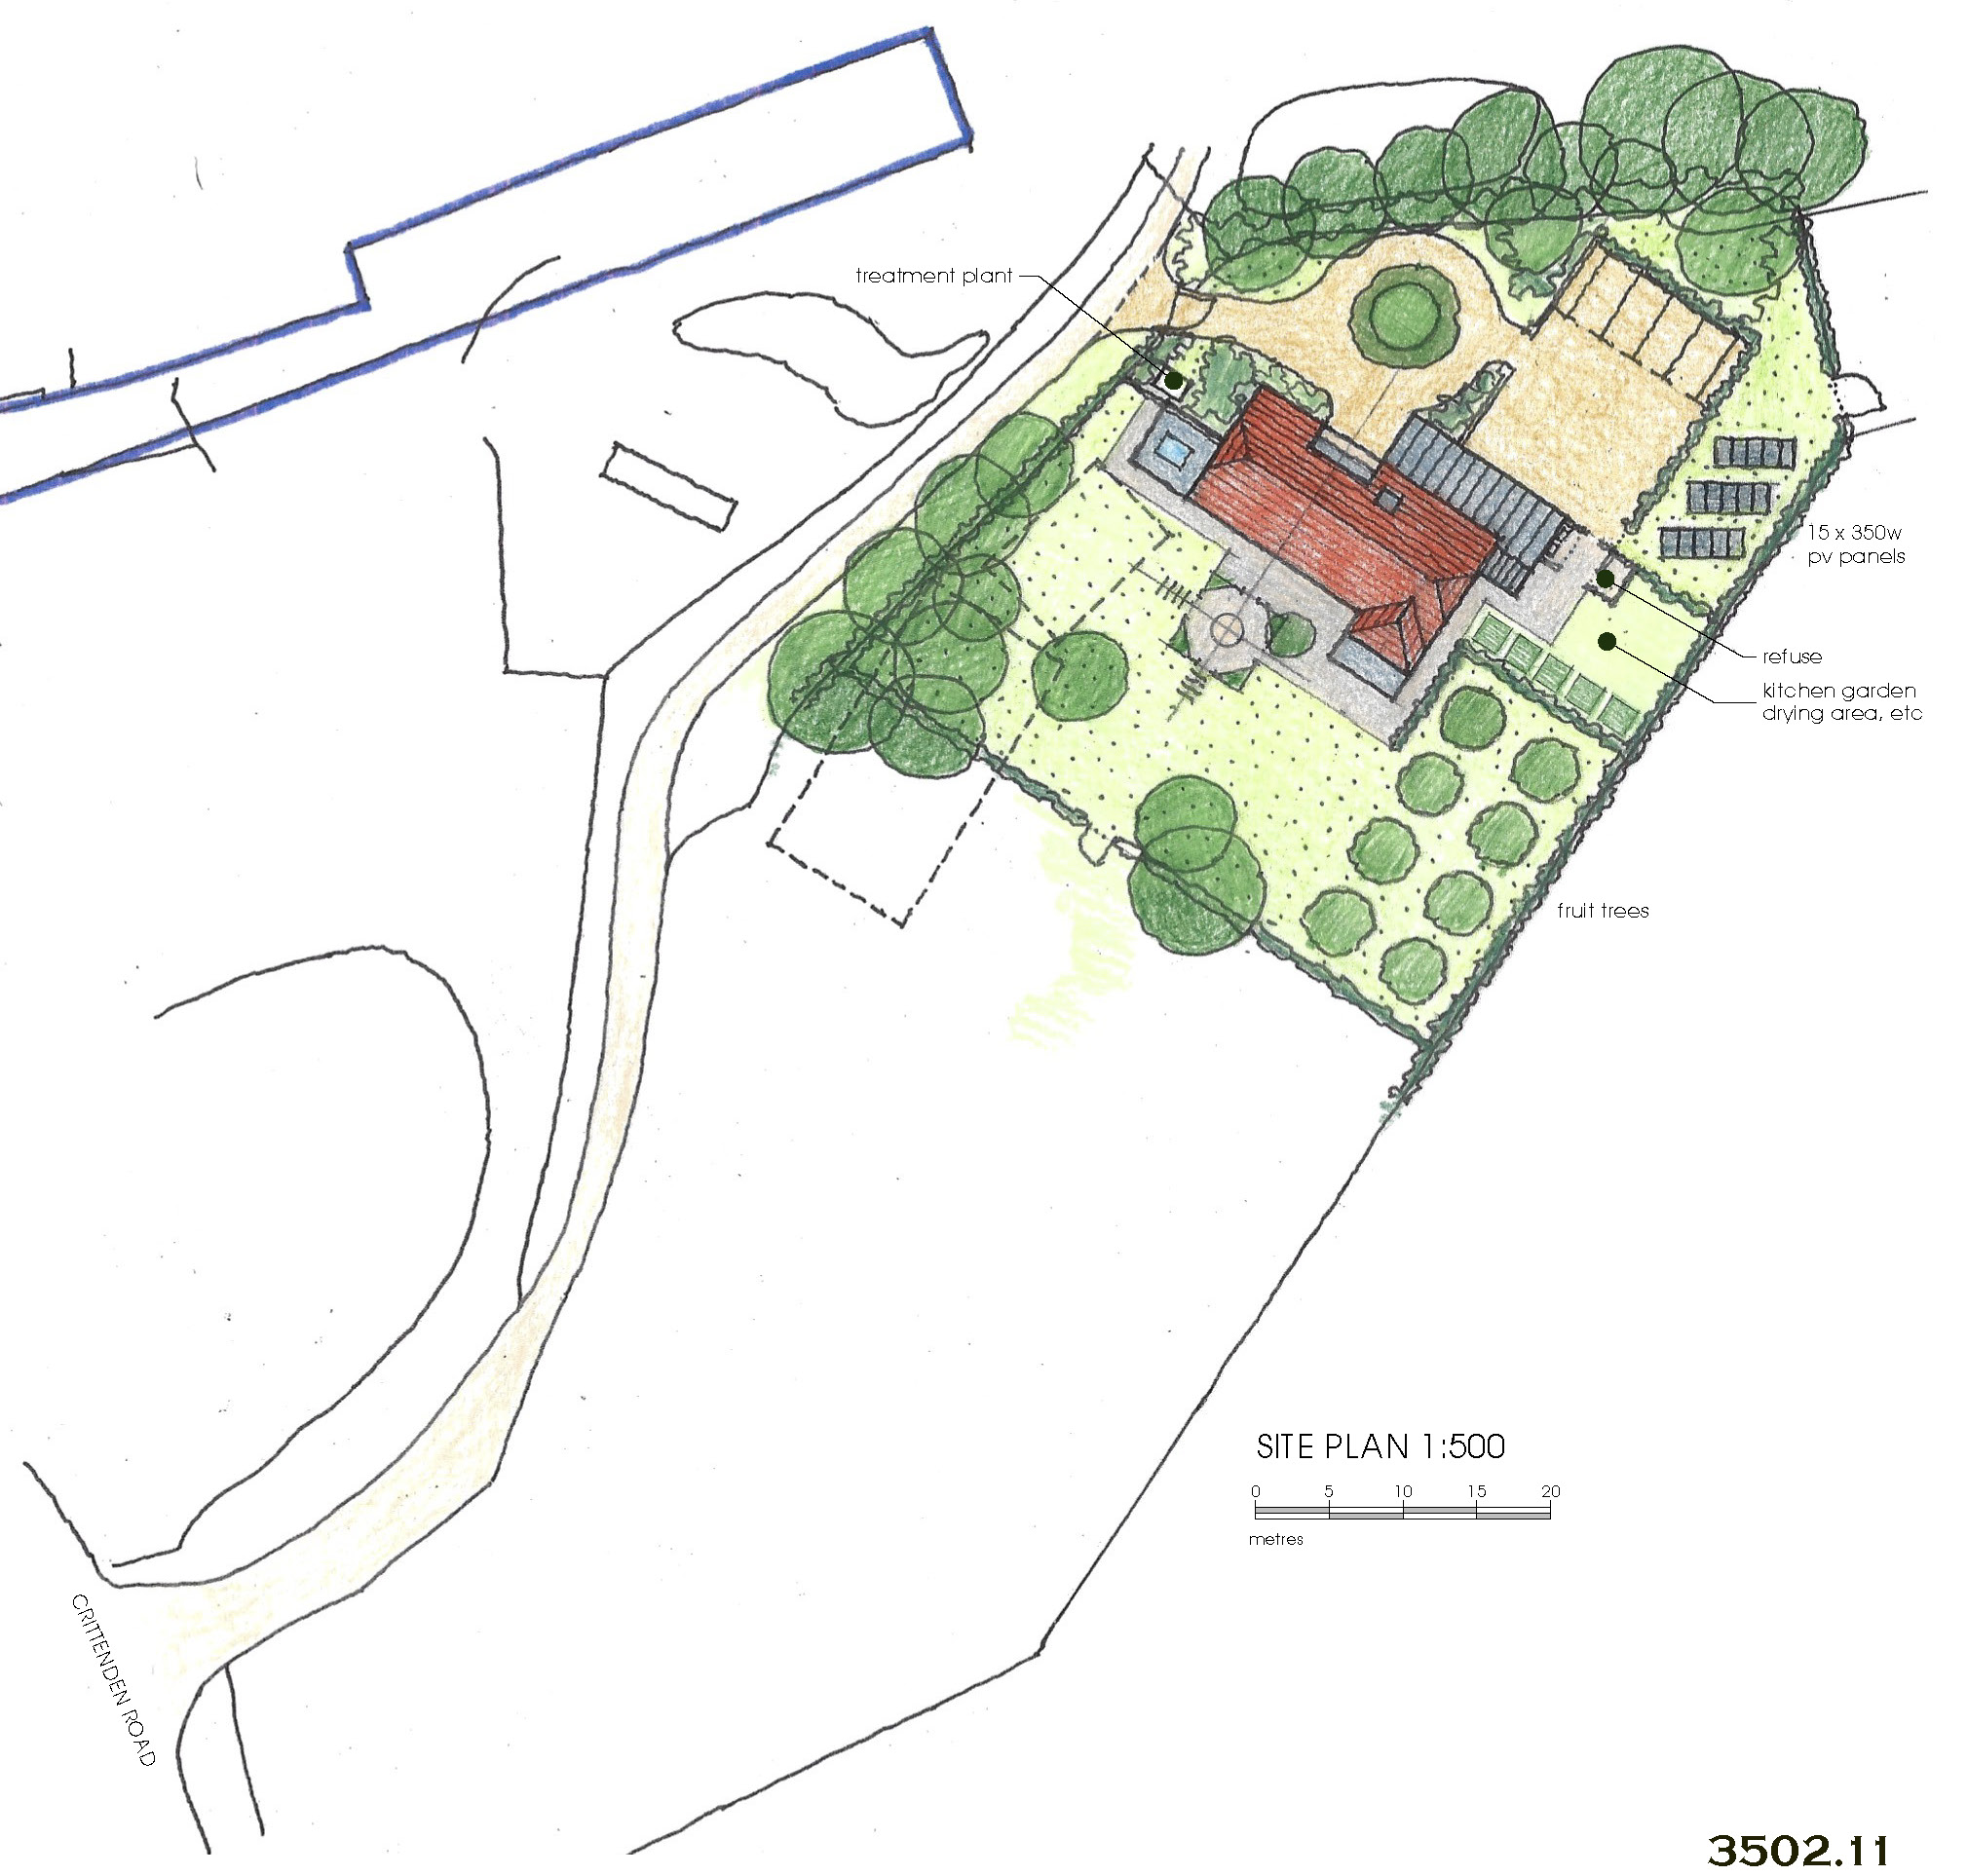 Site plan for a self build plot in Matfield, Kent